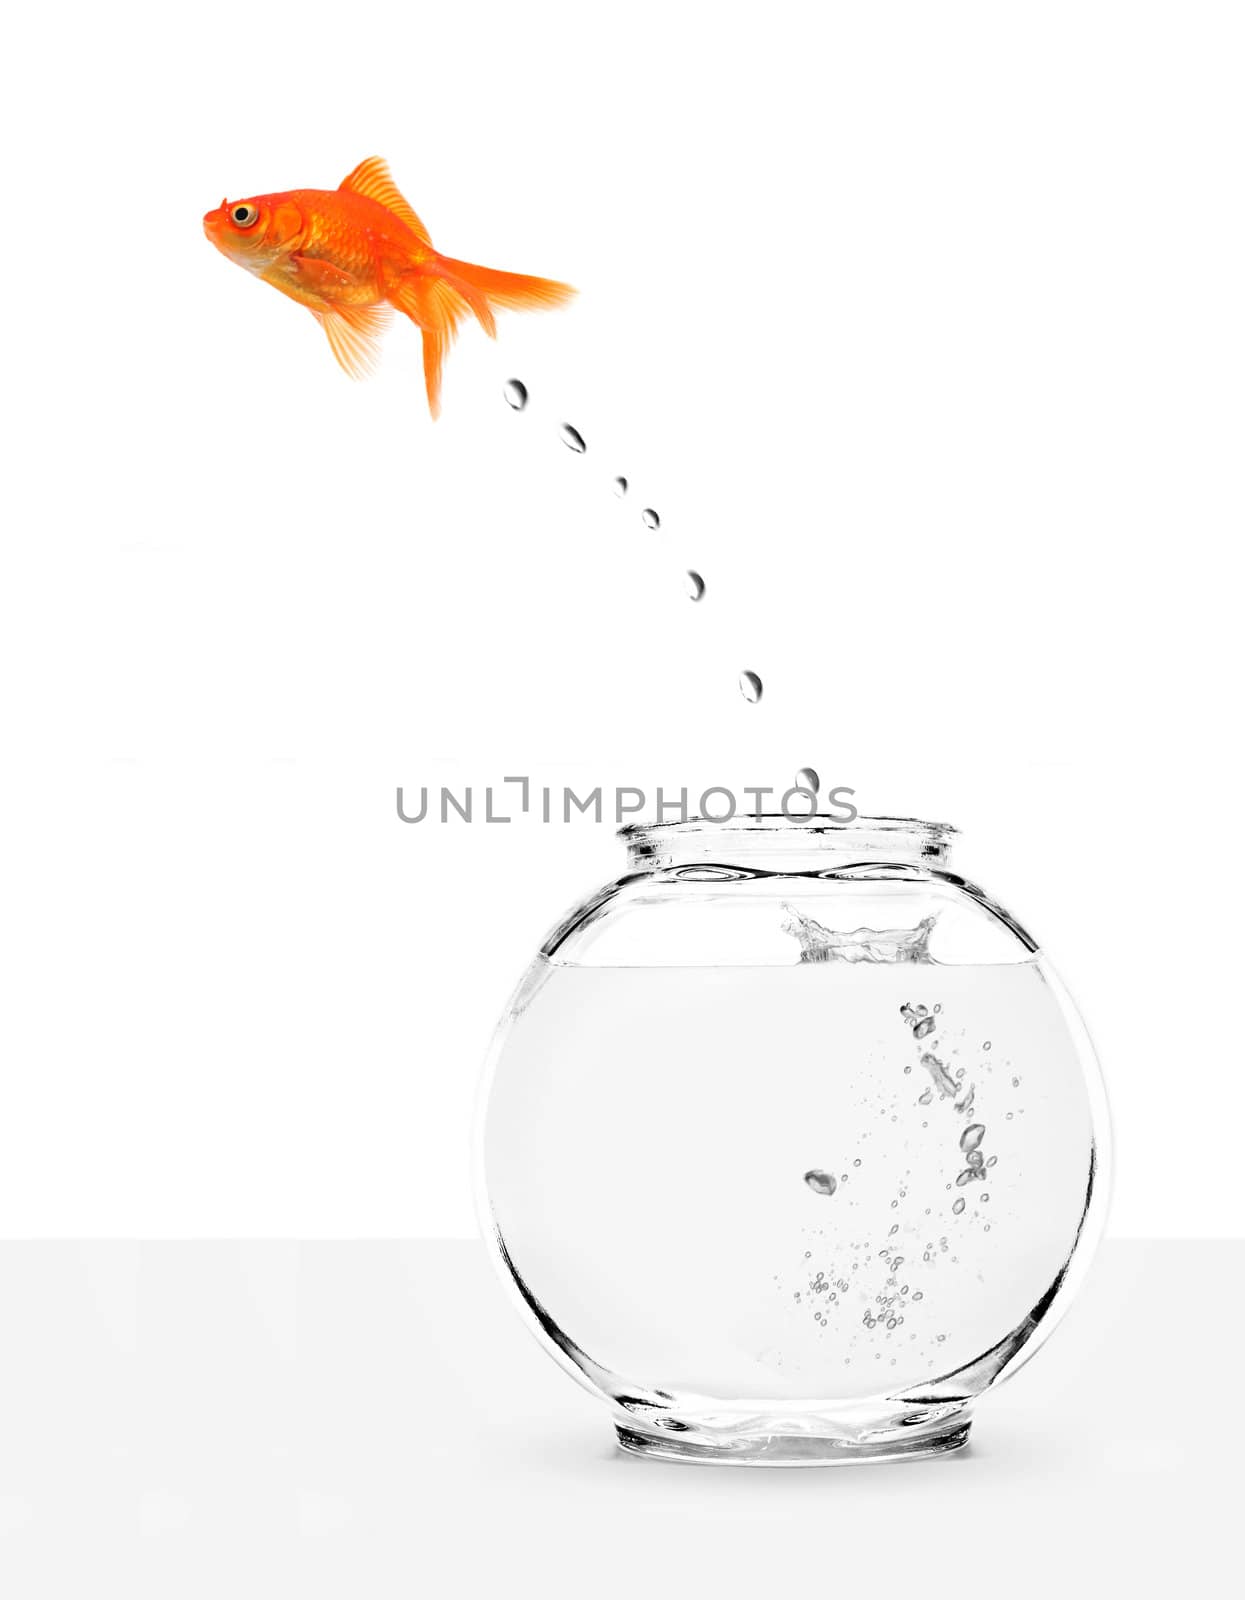 goldfish escaping from fishbowl by jjayo